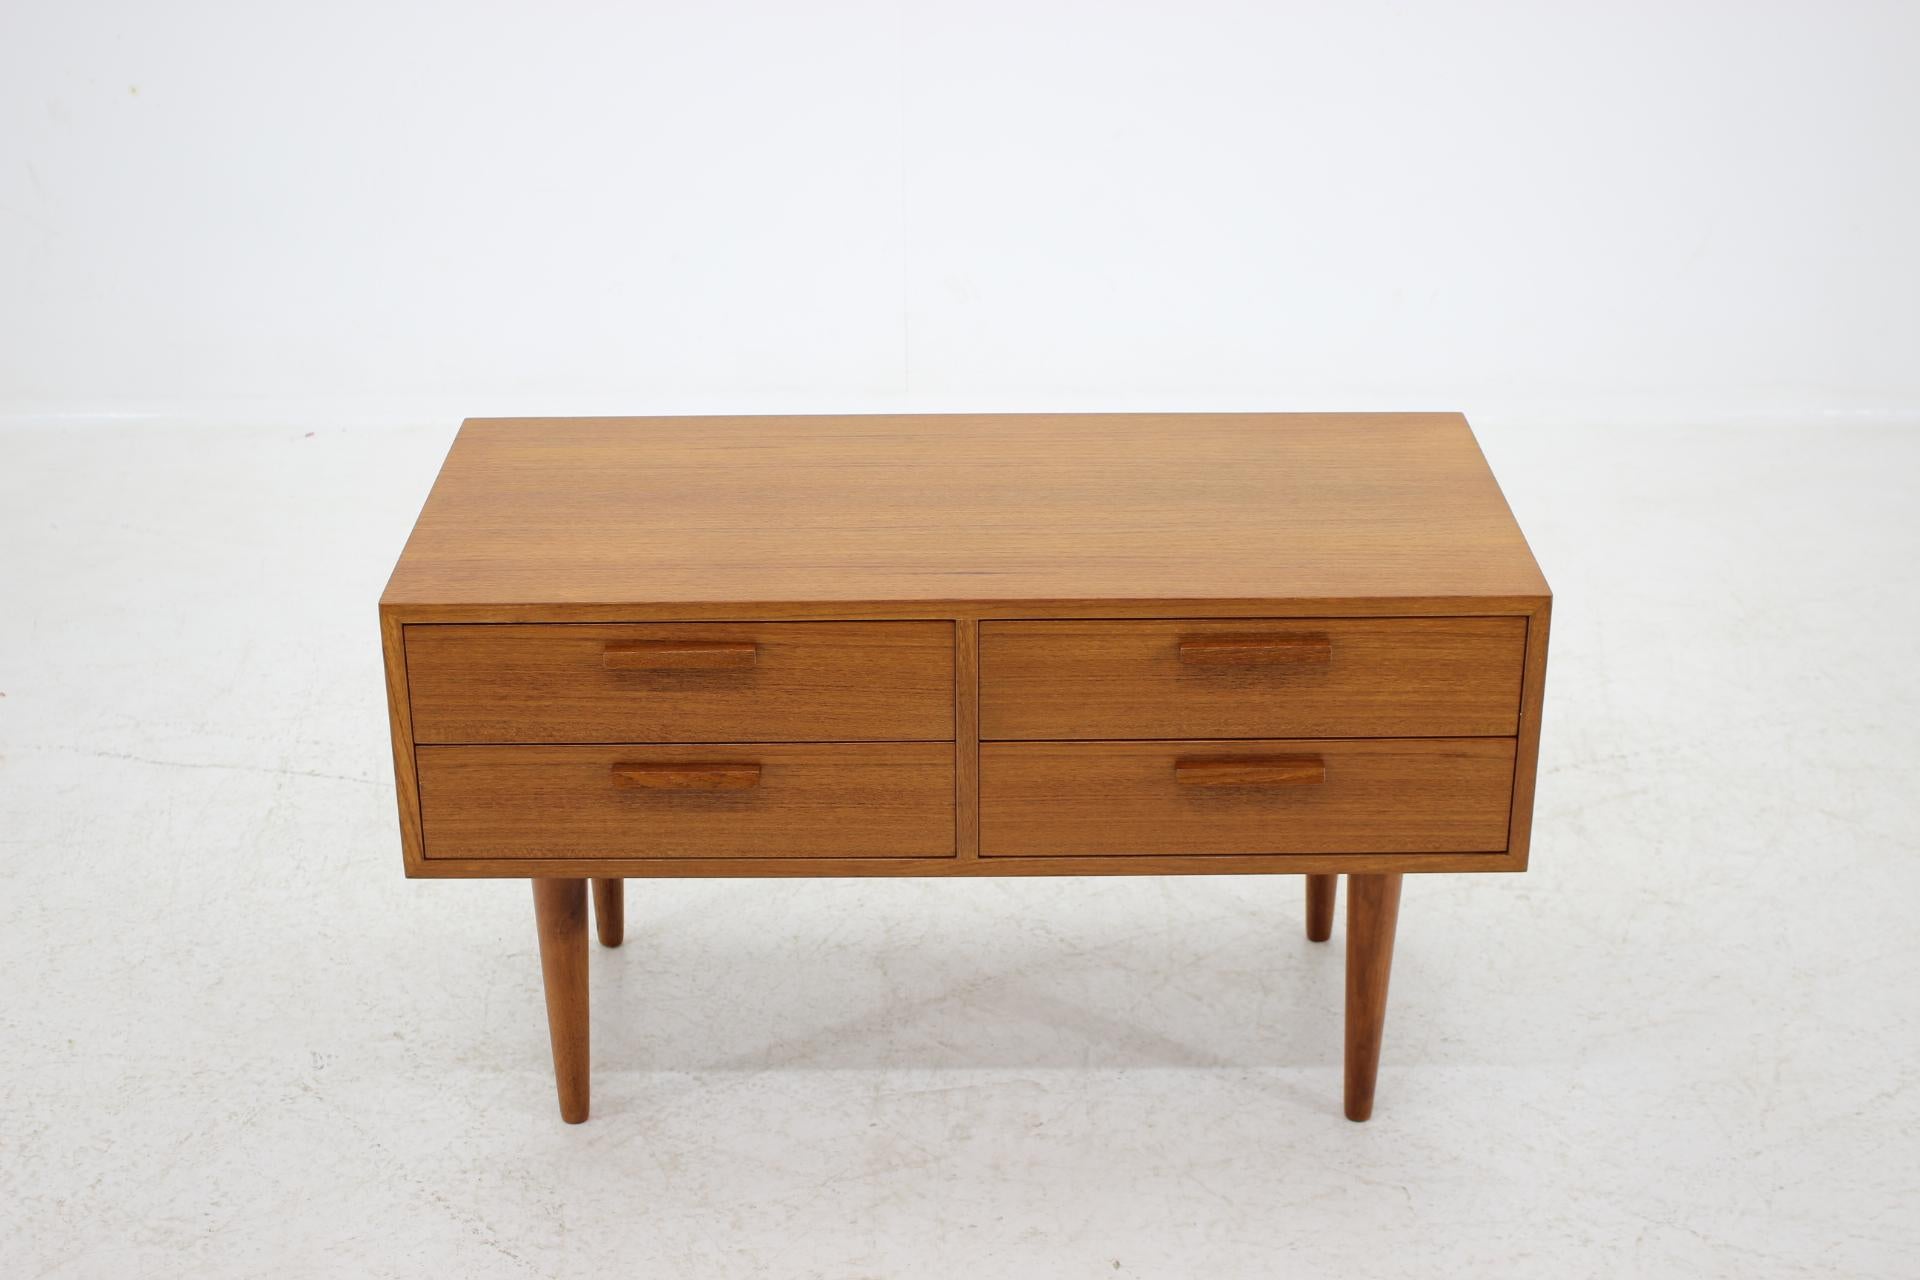 This commode features four drawers. The item was carefully refurbished.